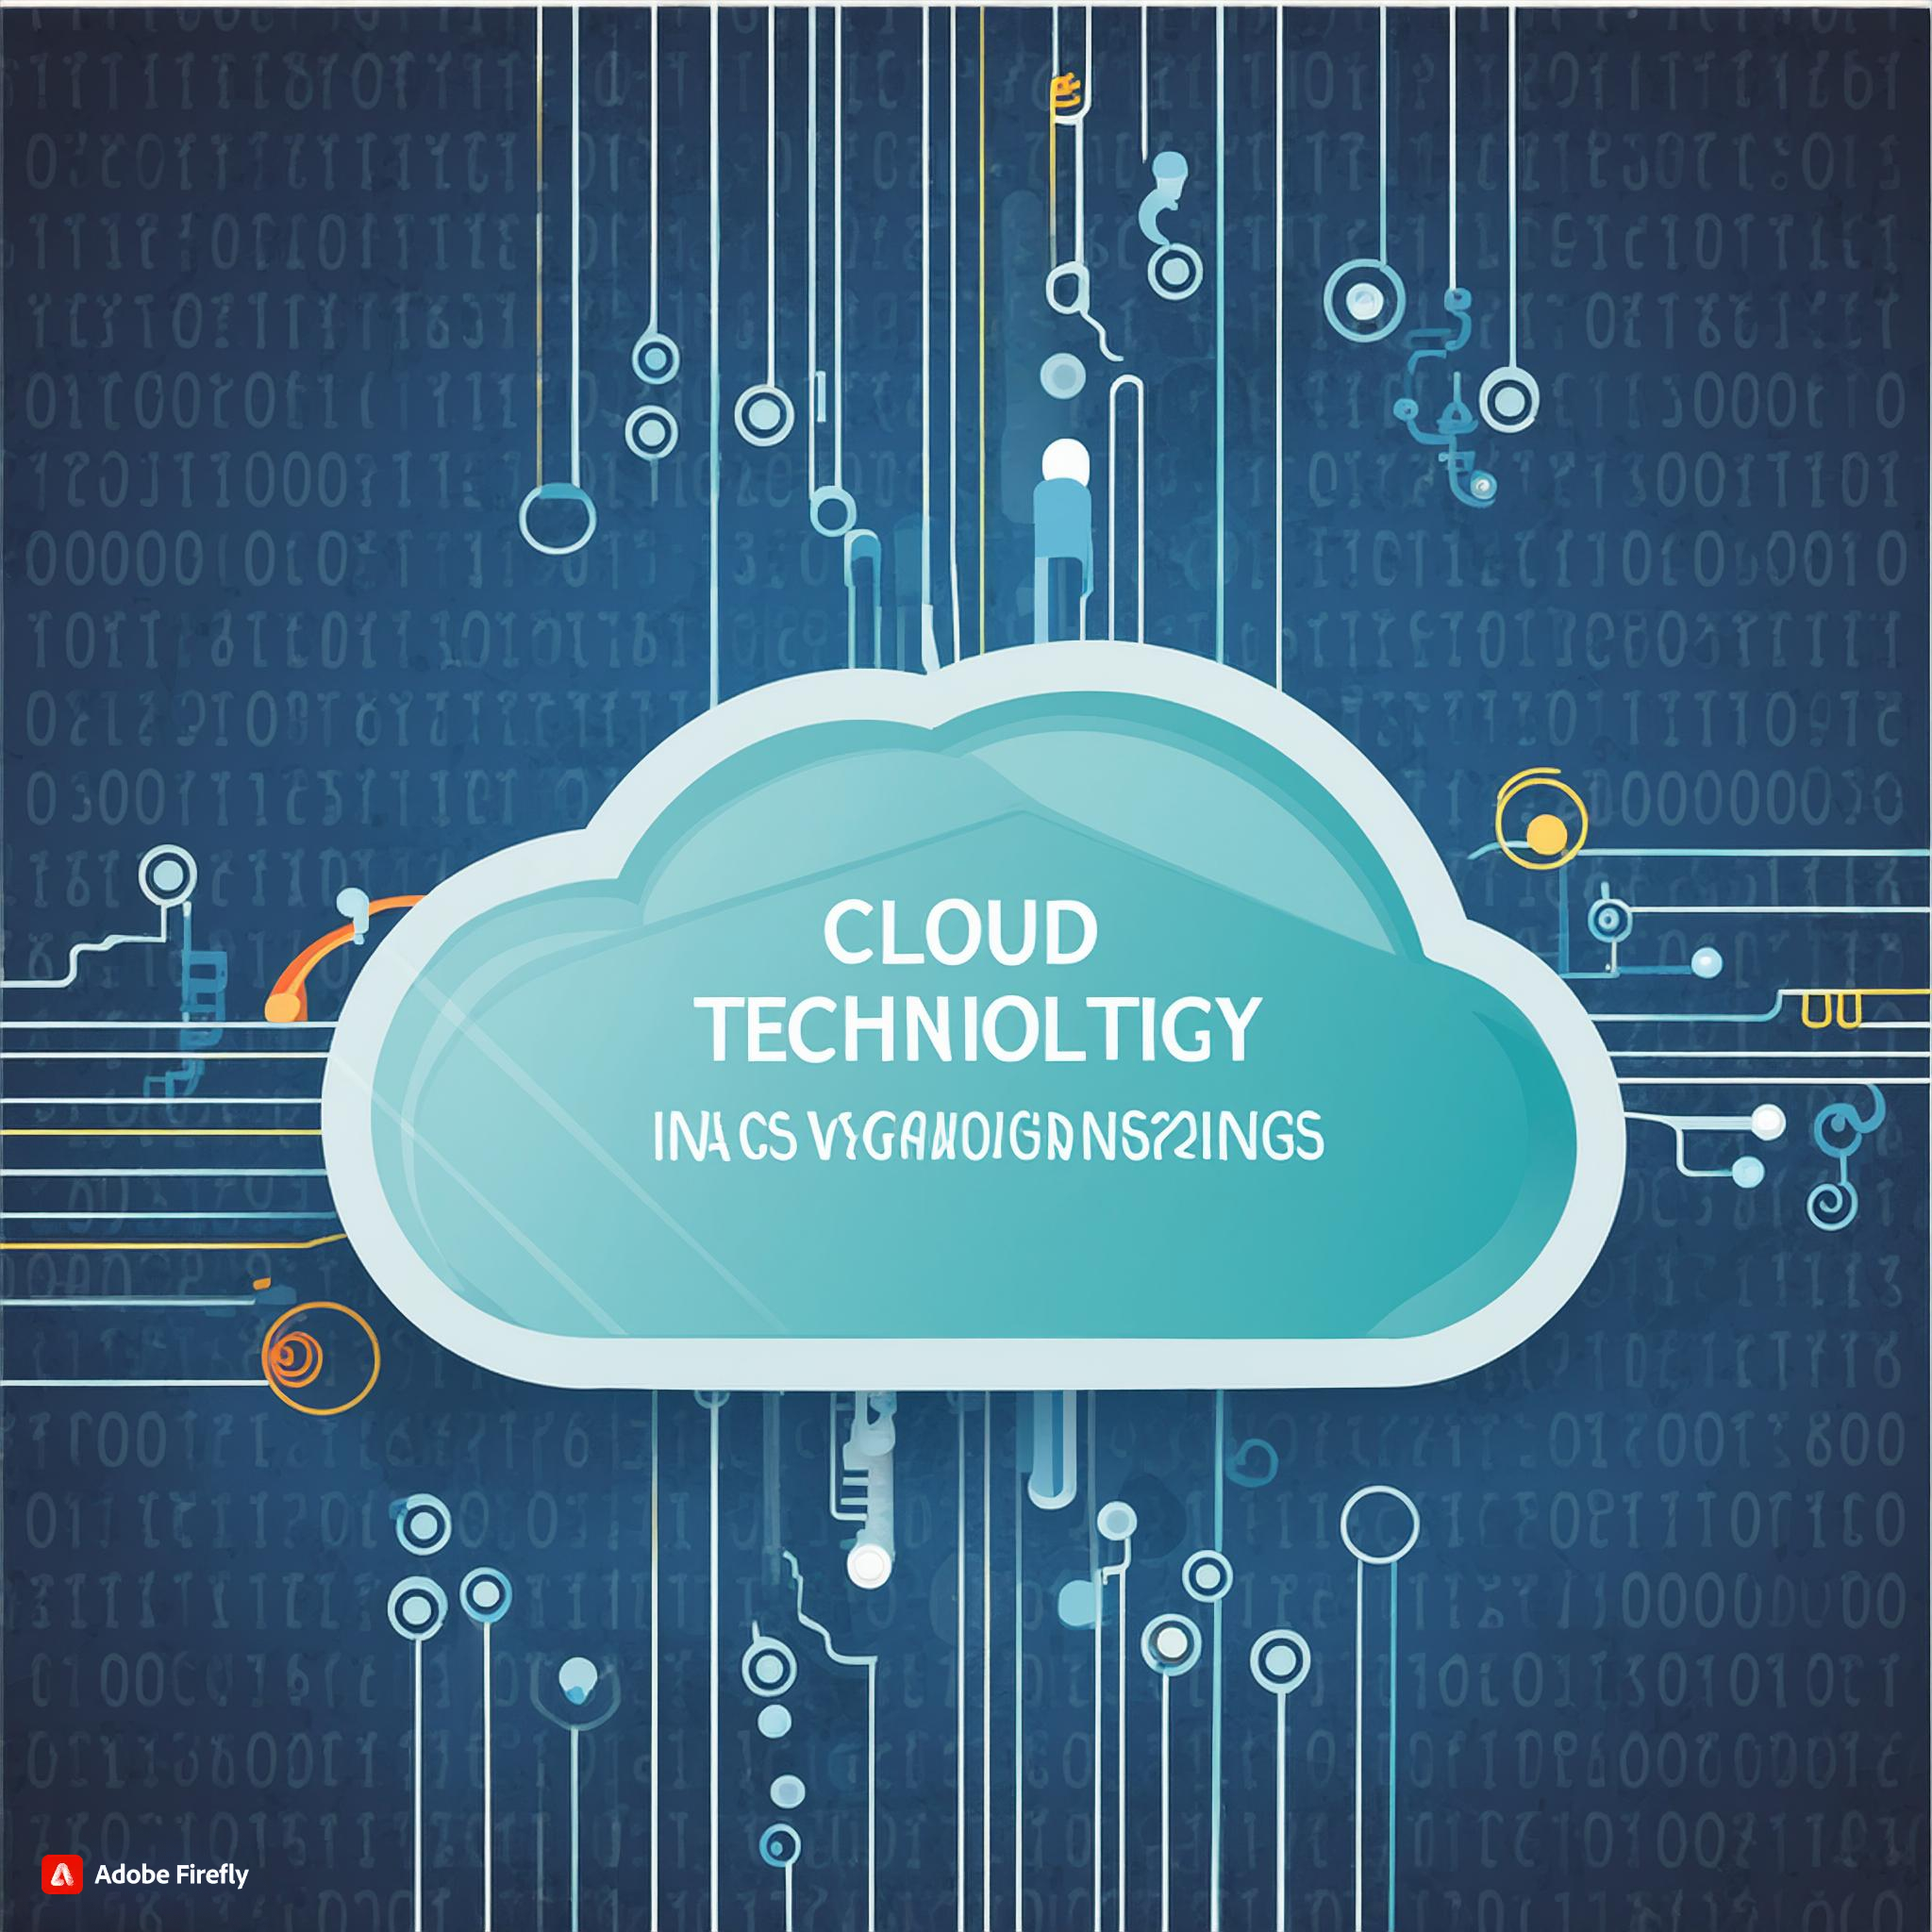 How Cloud Technology is Transforming Industries Today